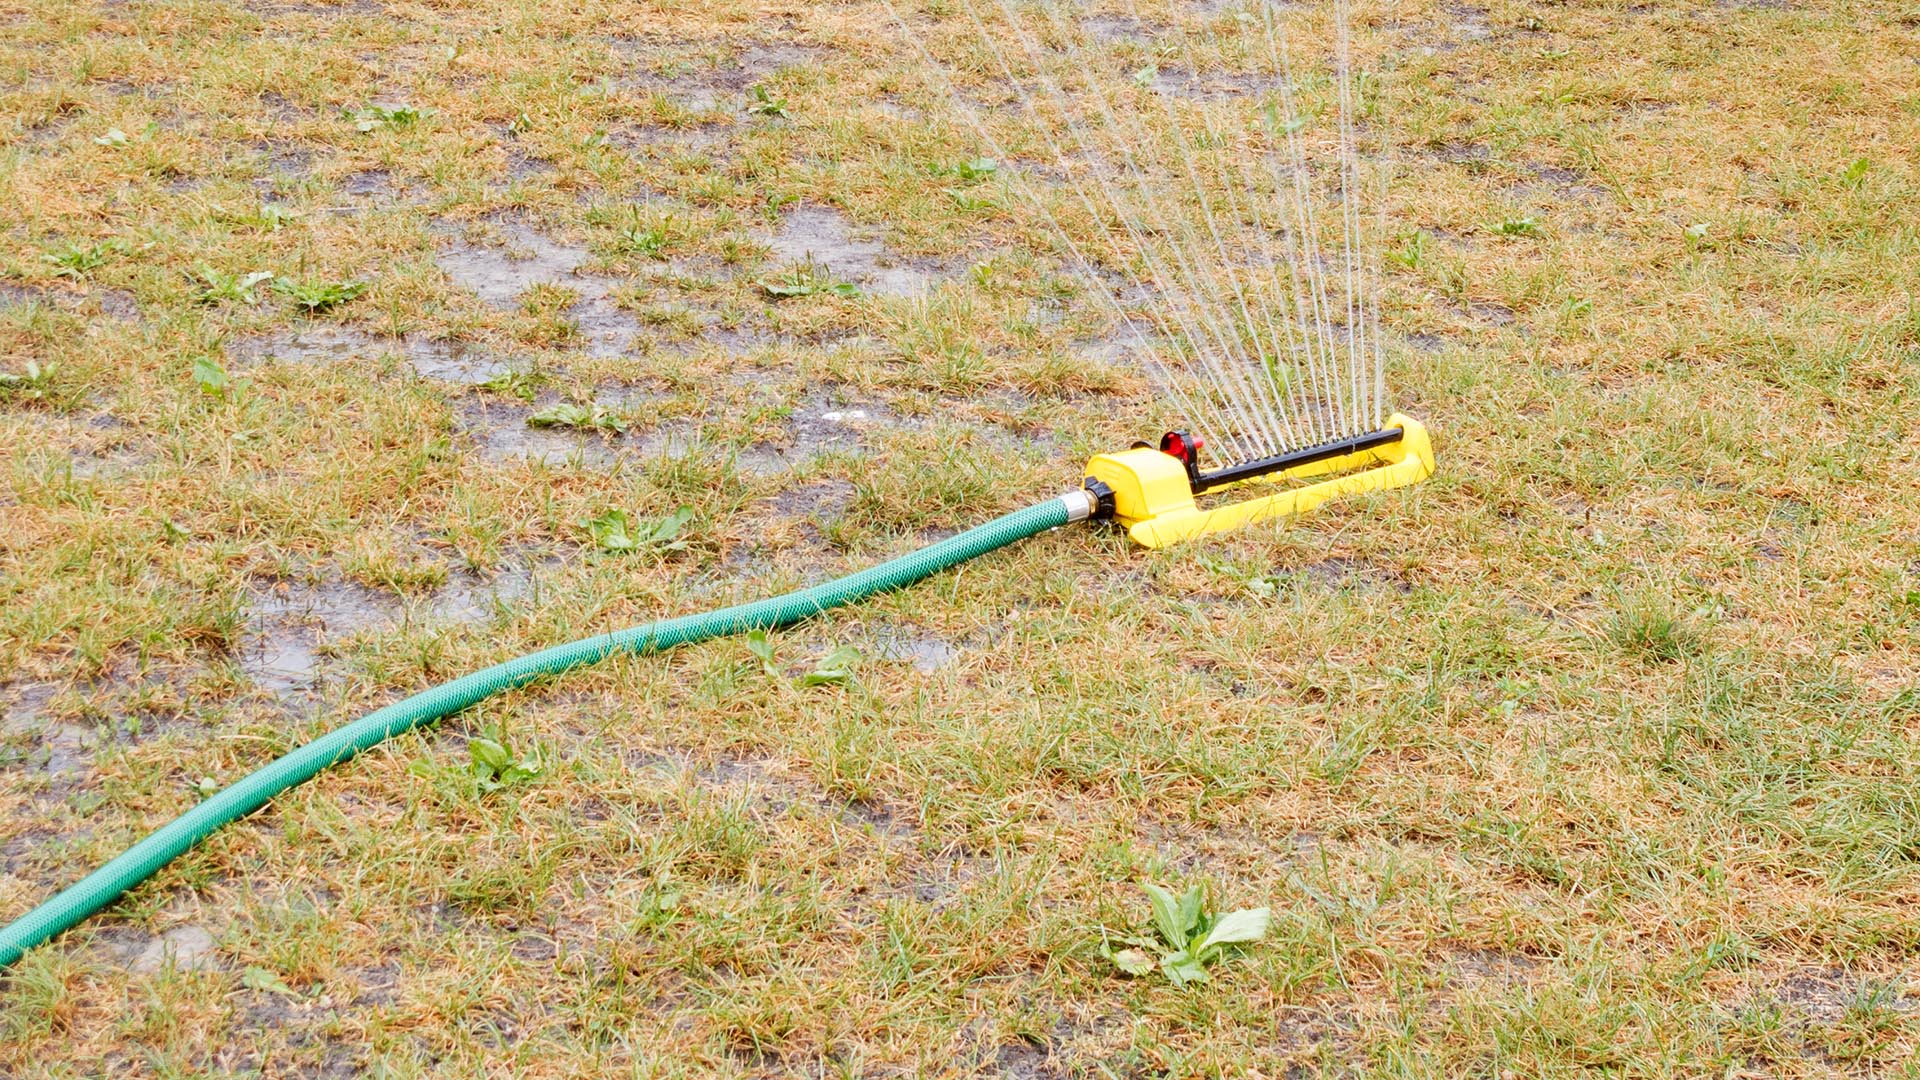 Watering dry lawn with sprinkler